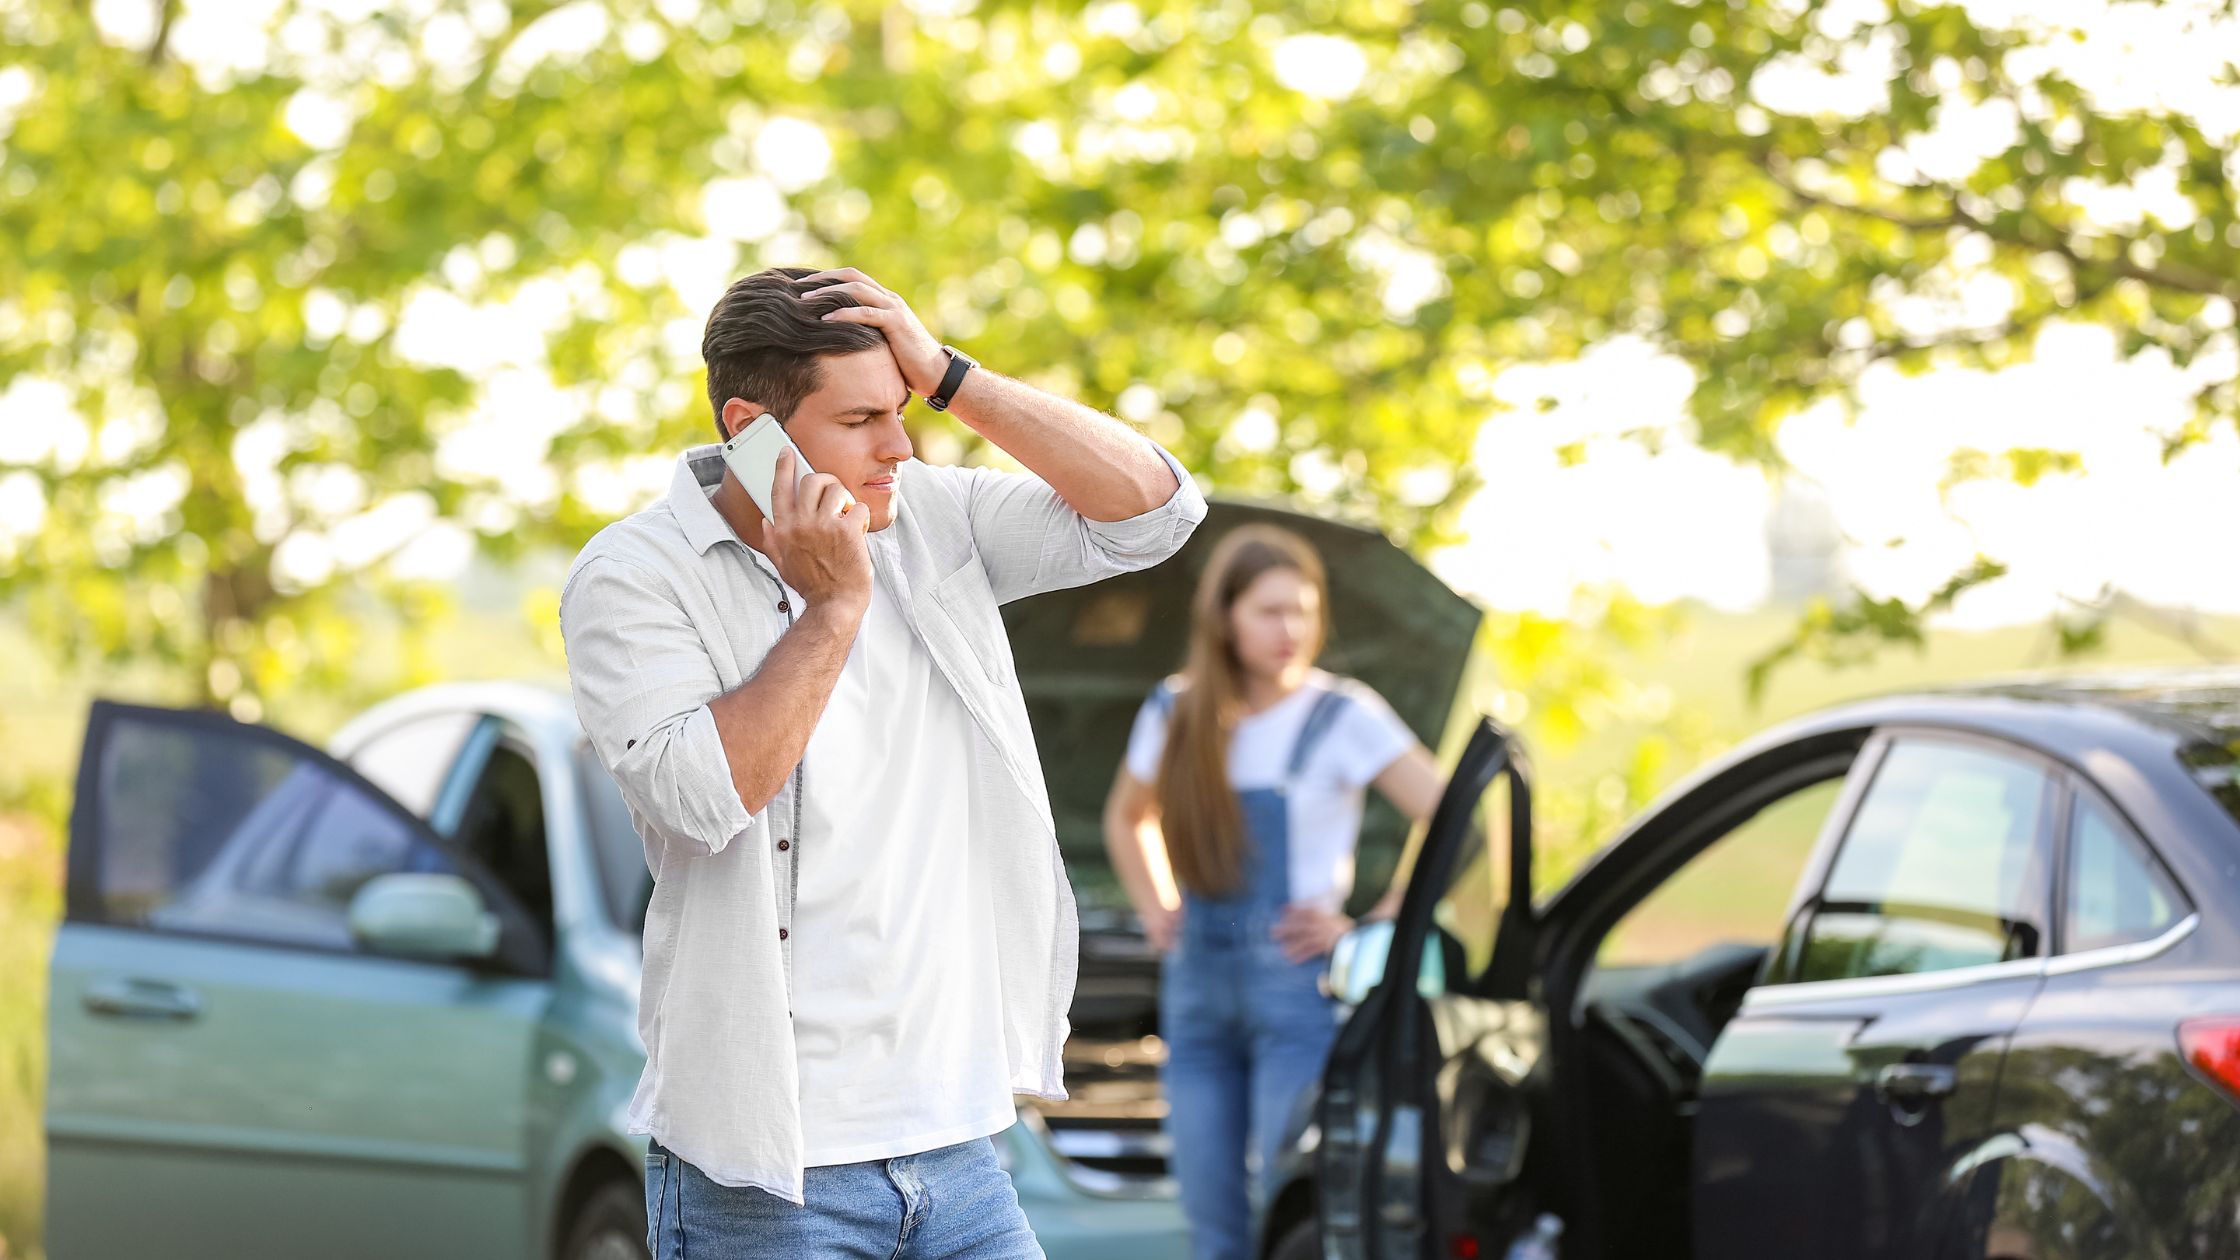 A distressed man on the phone after a vehicle collision, potentially discussing options with a Balcones Heights car accident lawyer, with an open car hood and a woman in the background.